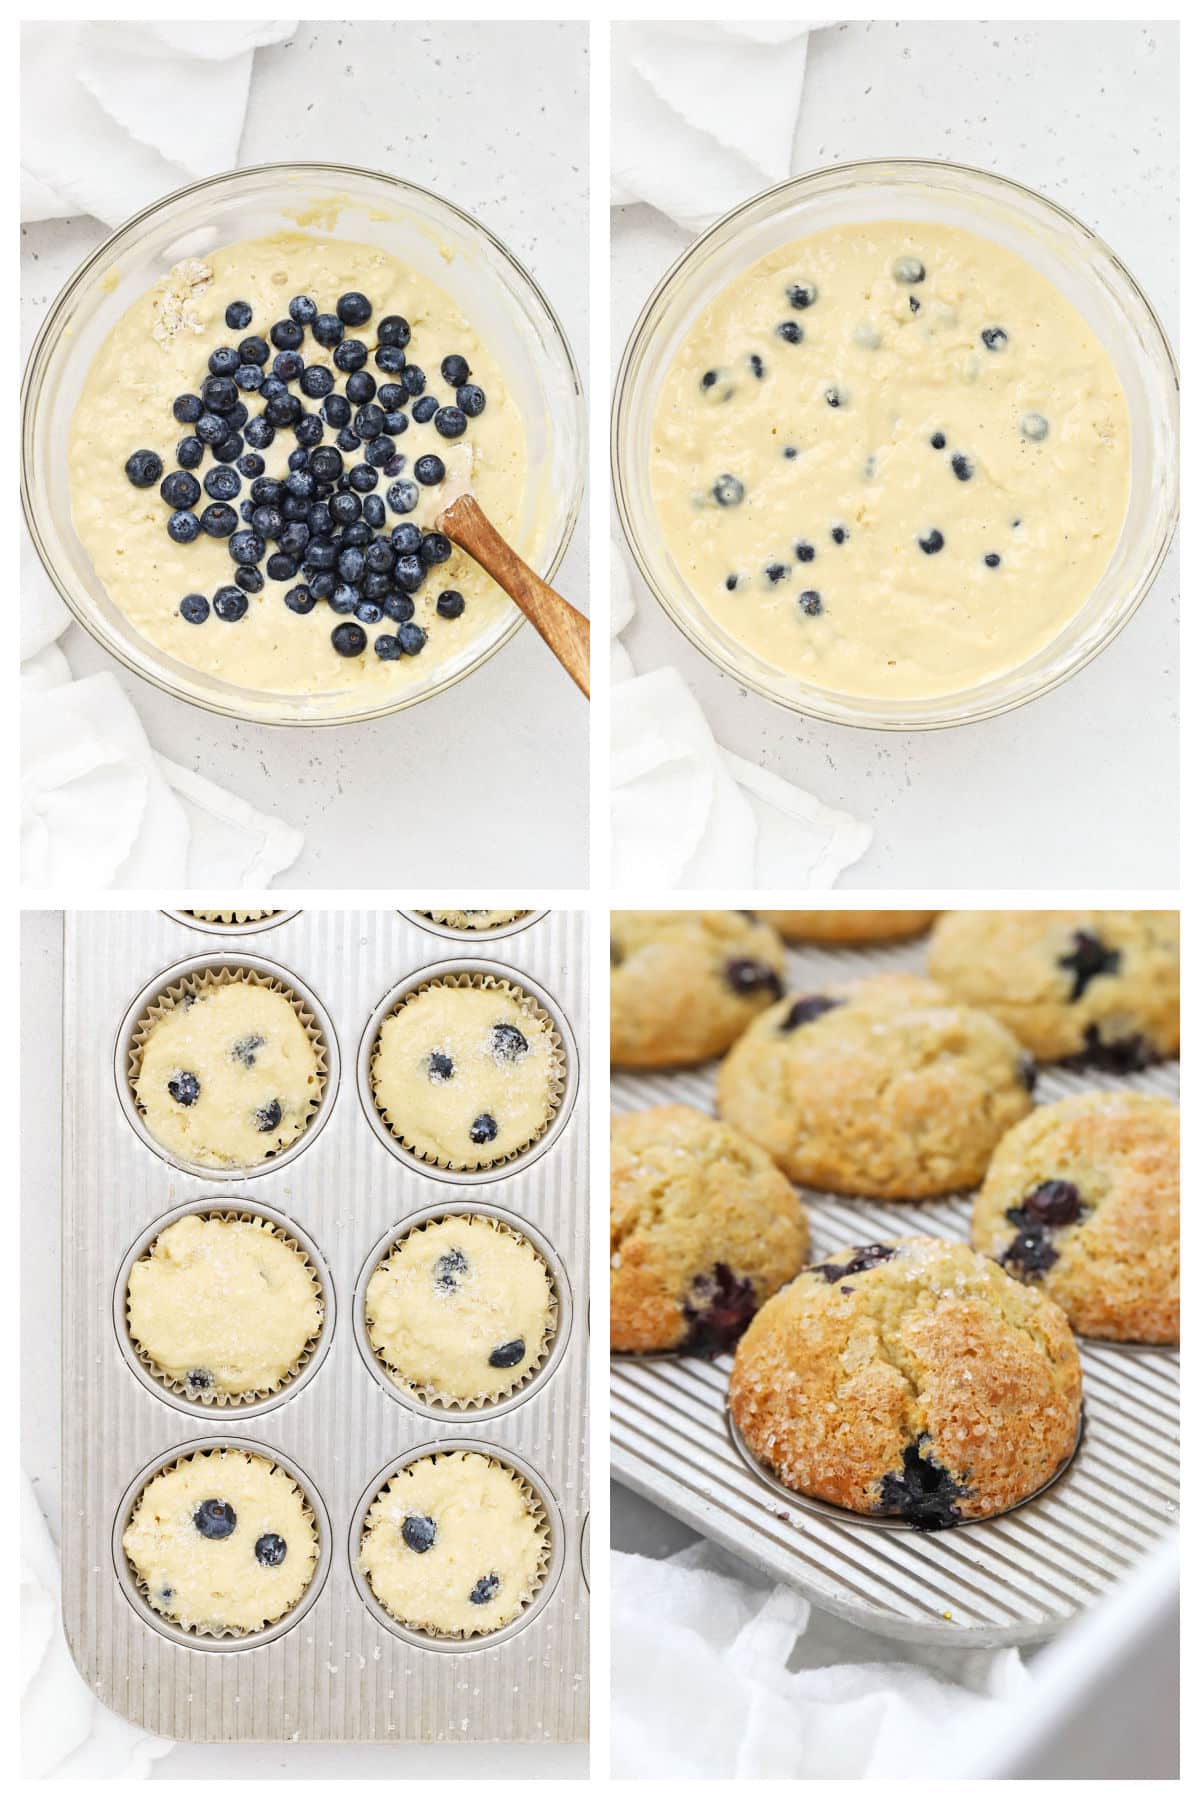 Making gluten-free blueberry muffins step by step